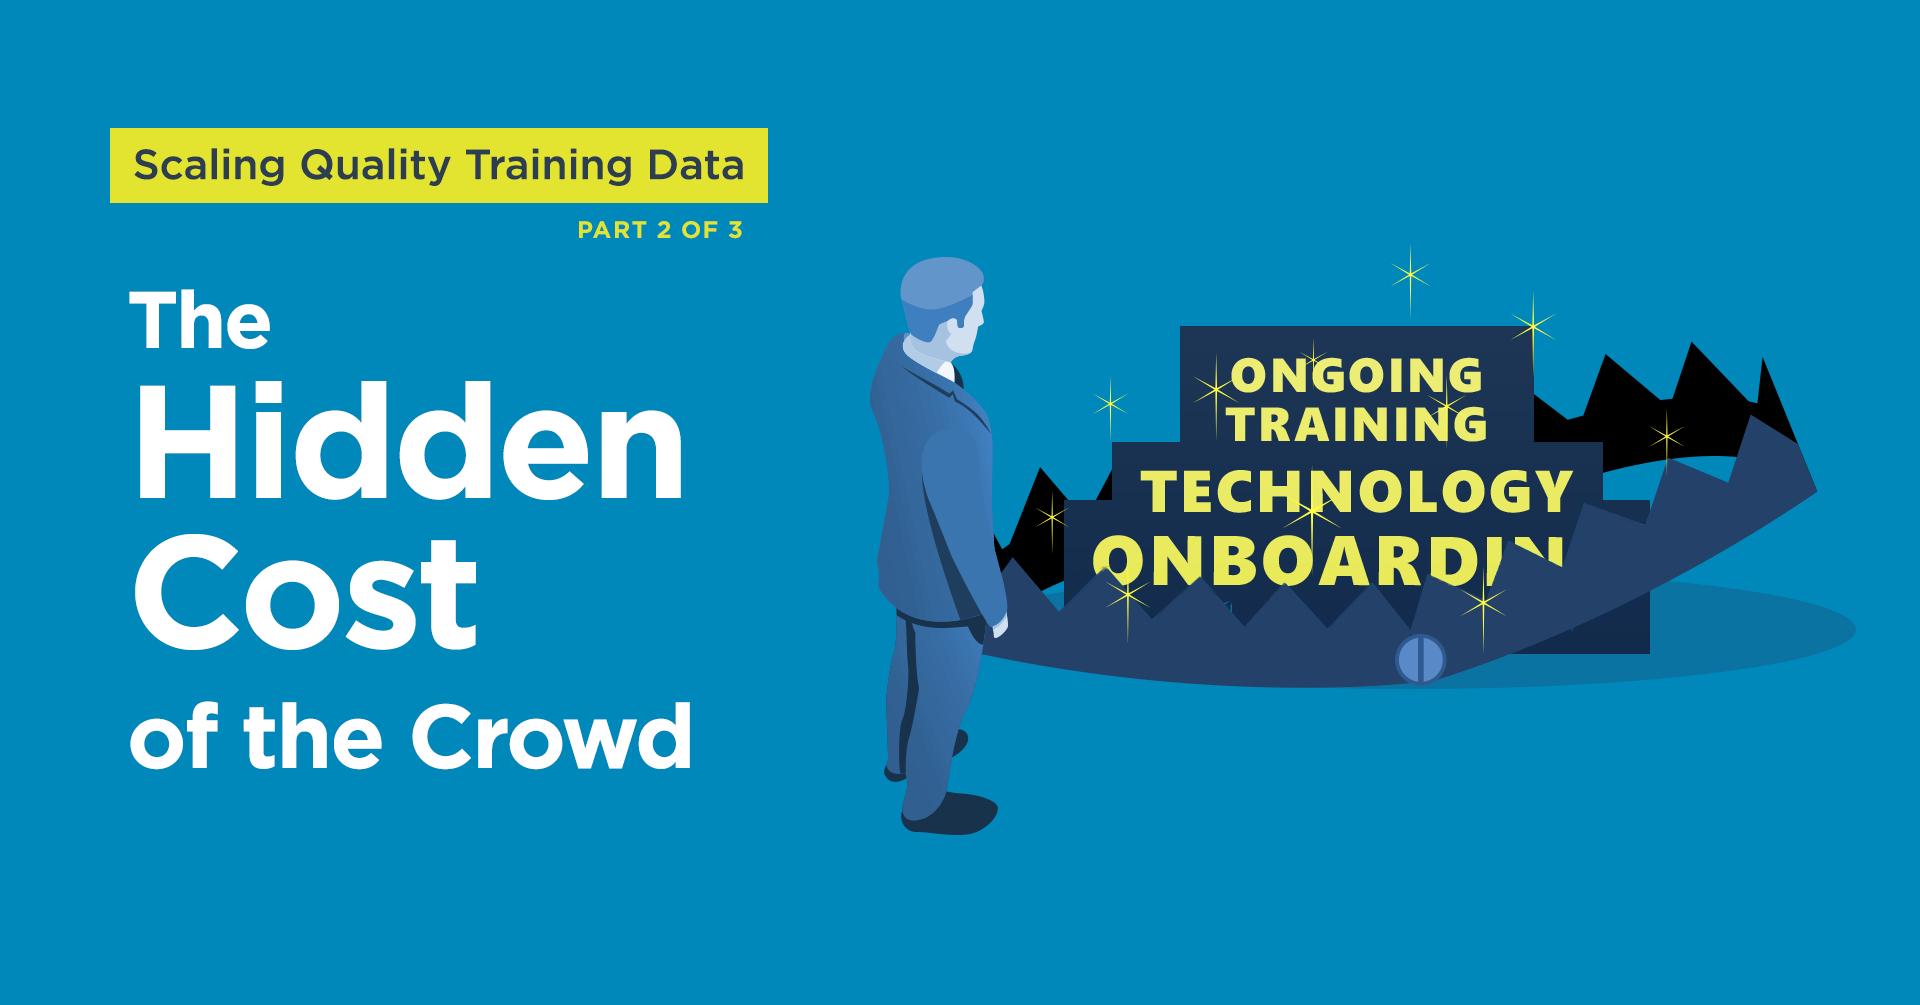 Scaling Quality Training Data: The Hidden Costs of the Crowd